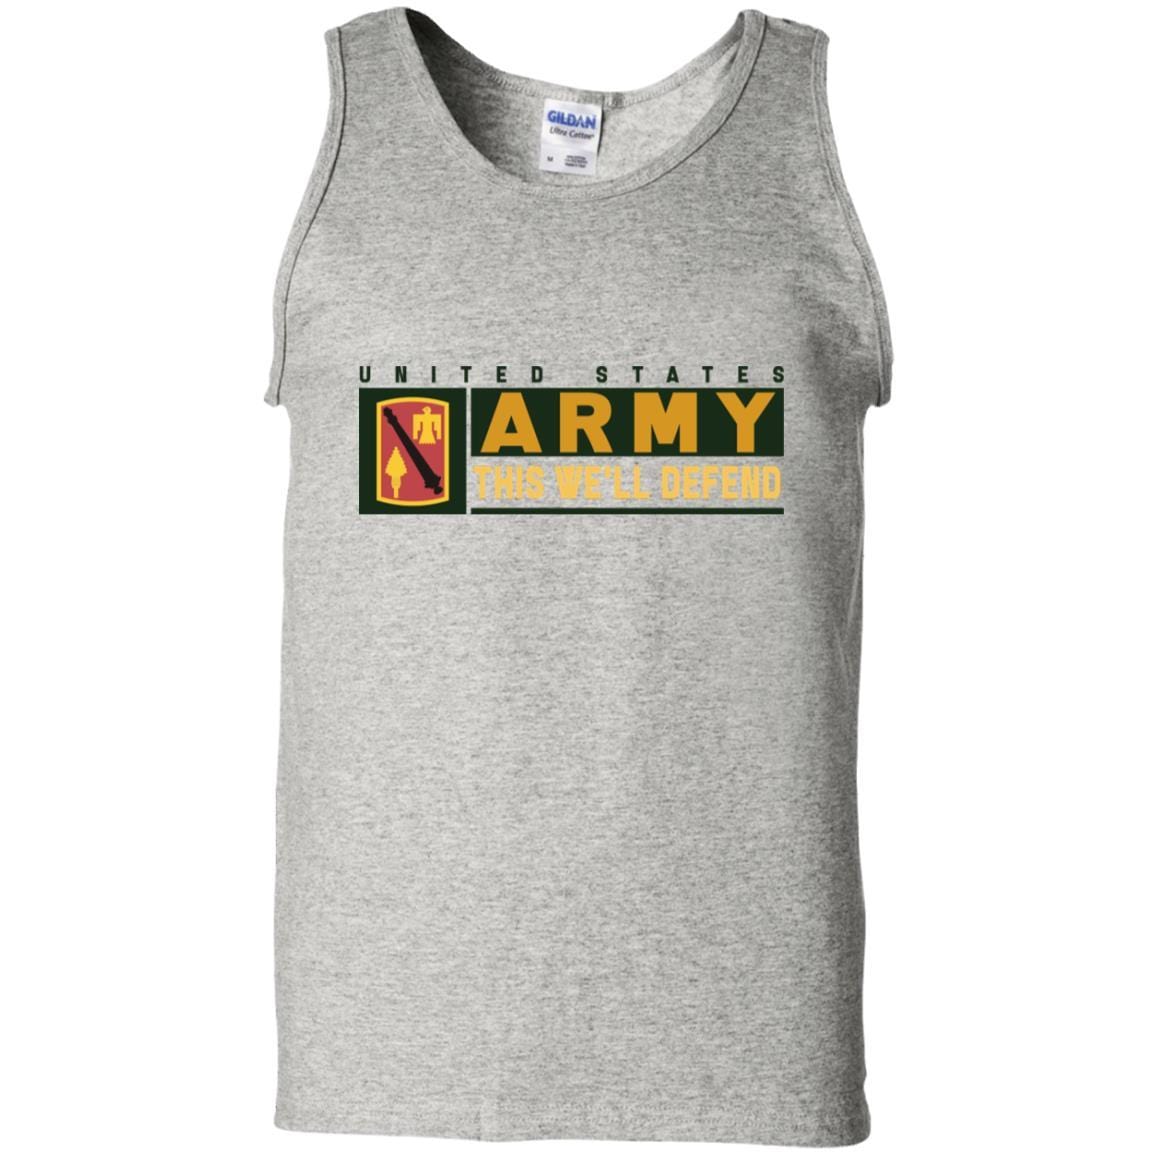 US Army 45 FIRES BRIGADE- This We'll Defend T-Shirt On Front For Men-TShirt-Army-Veterans Nation